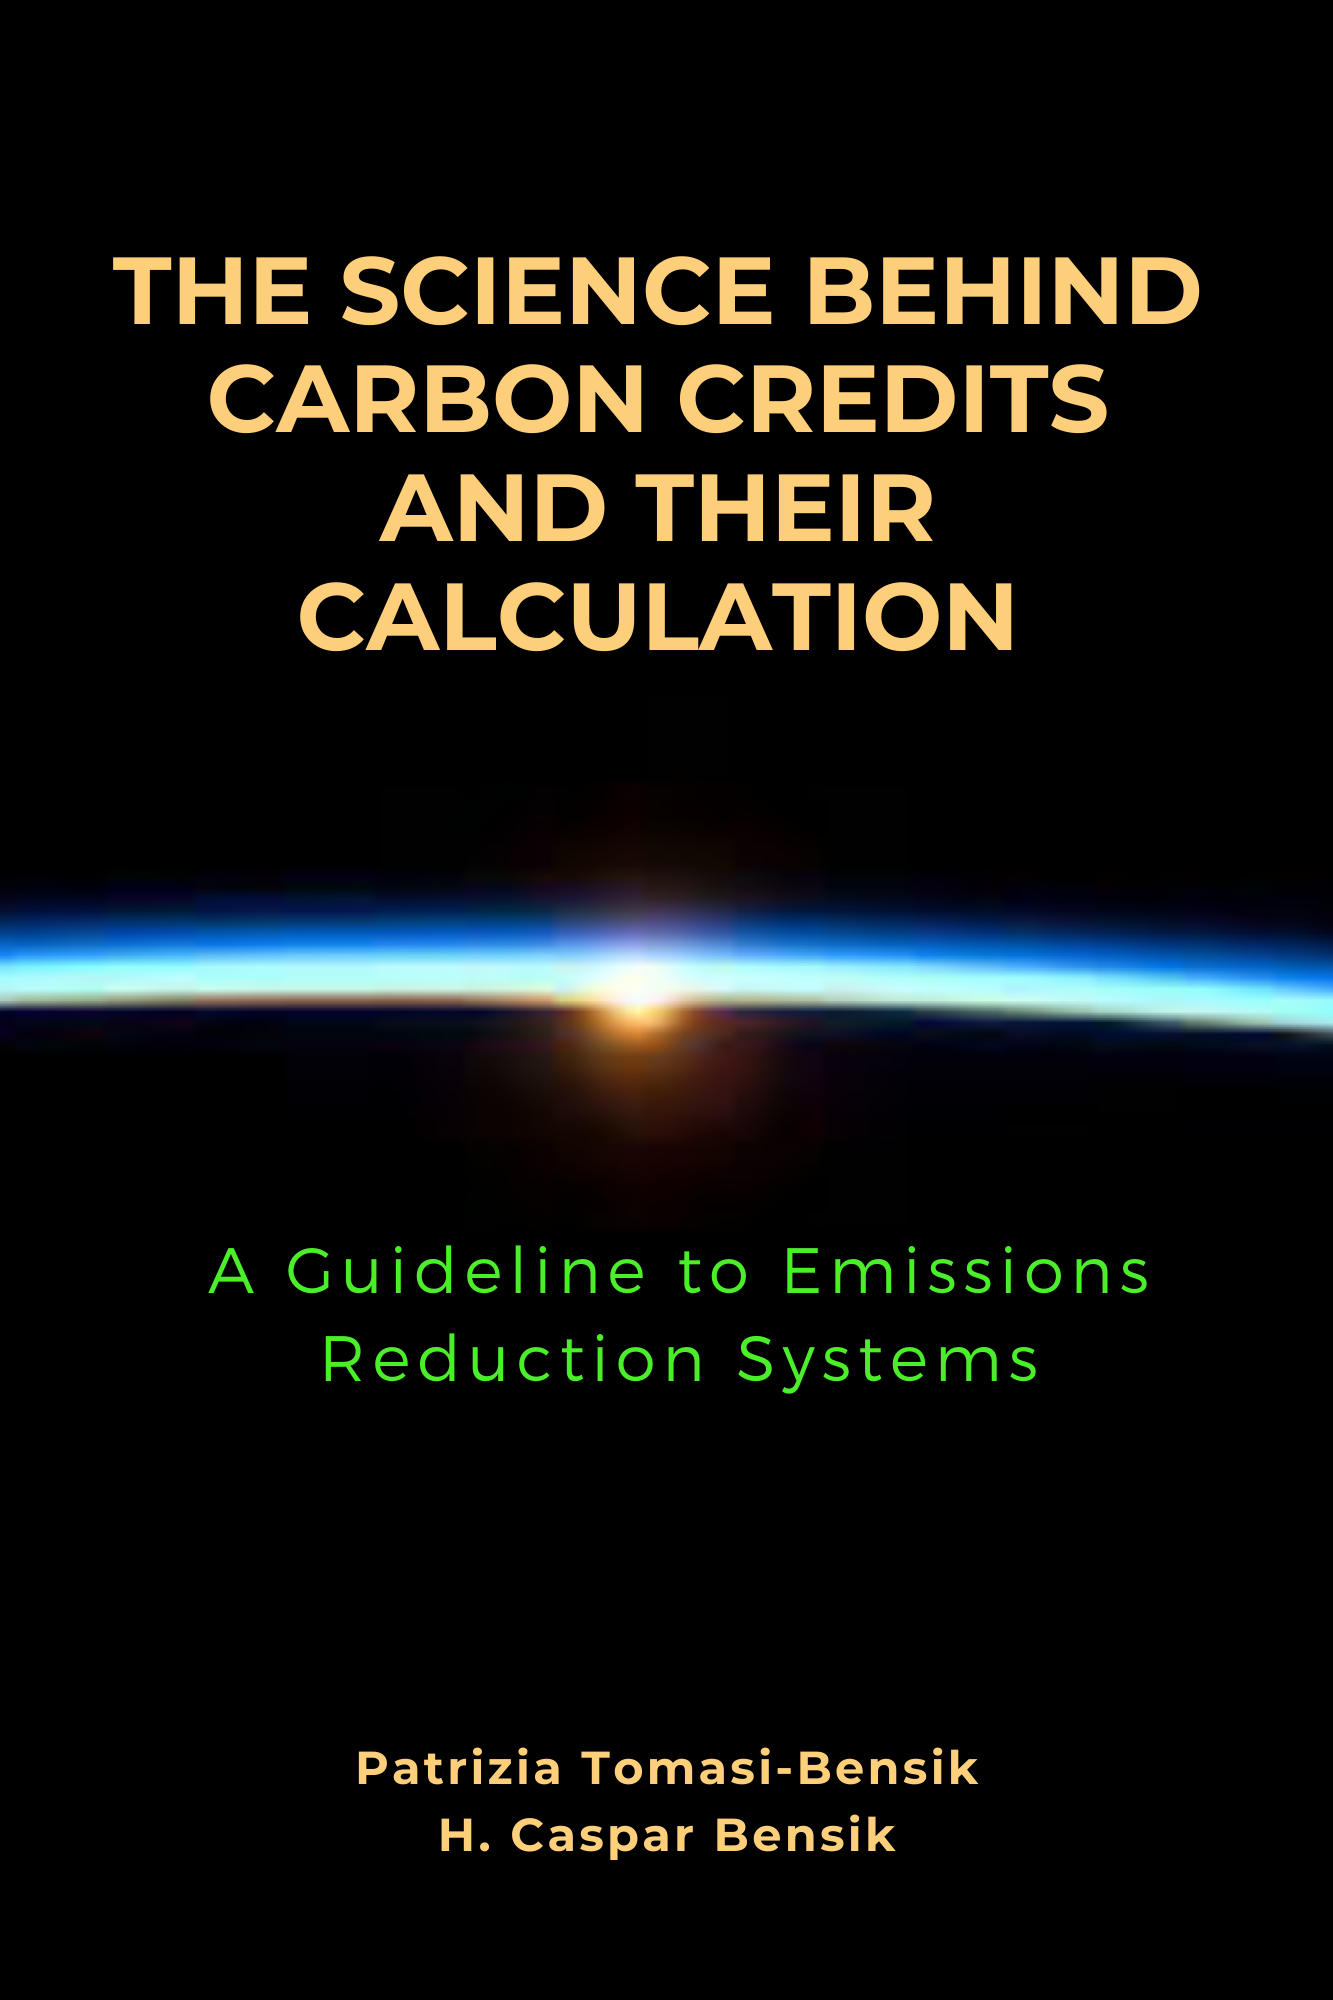 The Science Behind Carbon Credits and Their Calculation